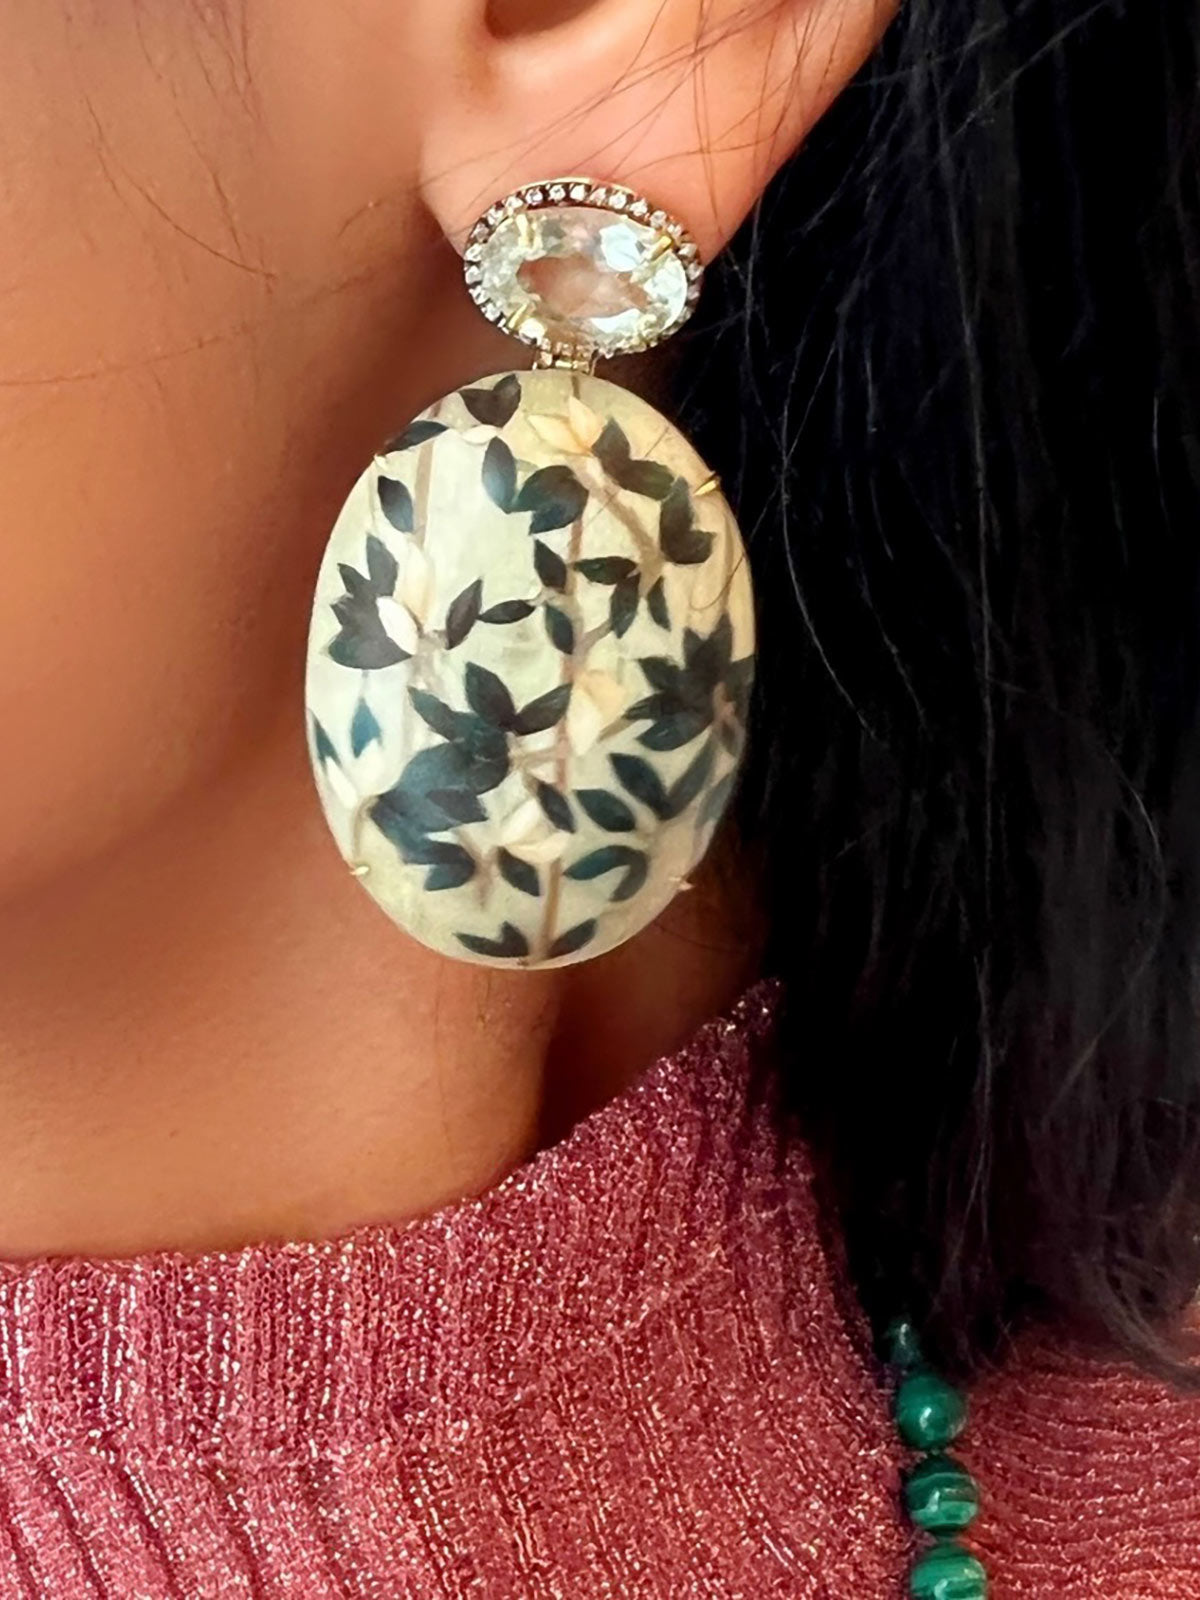 Oval Marquetry Earrings | Mangrove Leaf with Praisolite & Diamonds Oval Marquetry Earrings | Mangrove Leaf with Praisolite & Diamonds